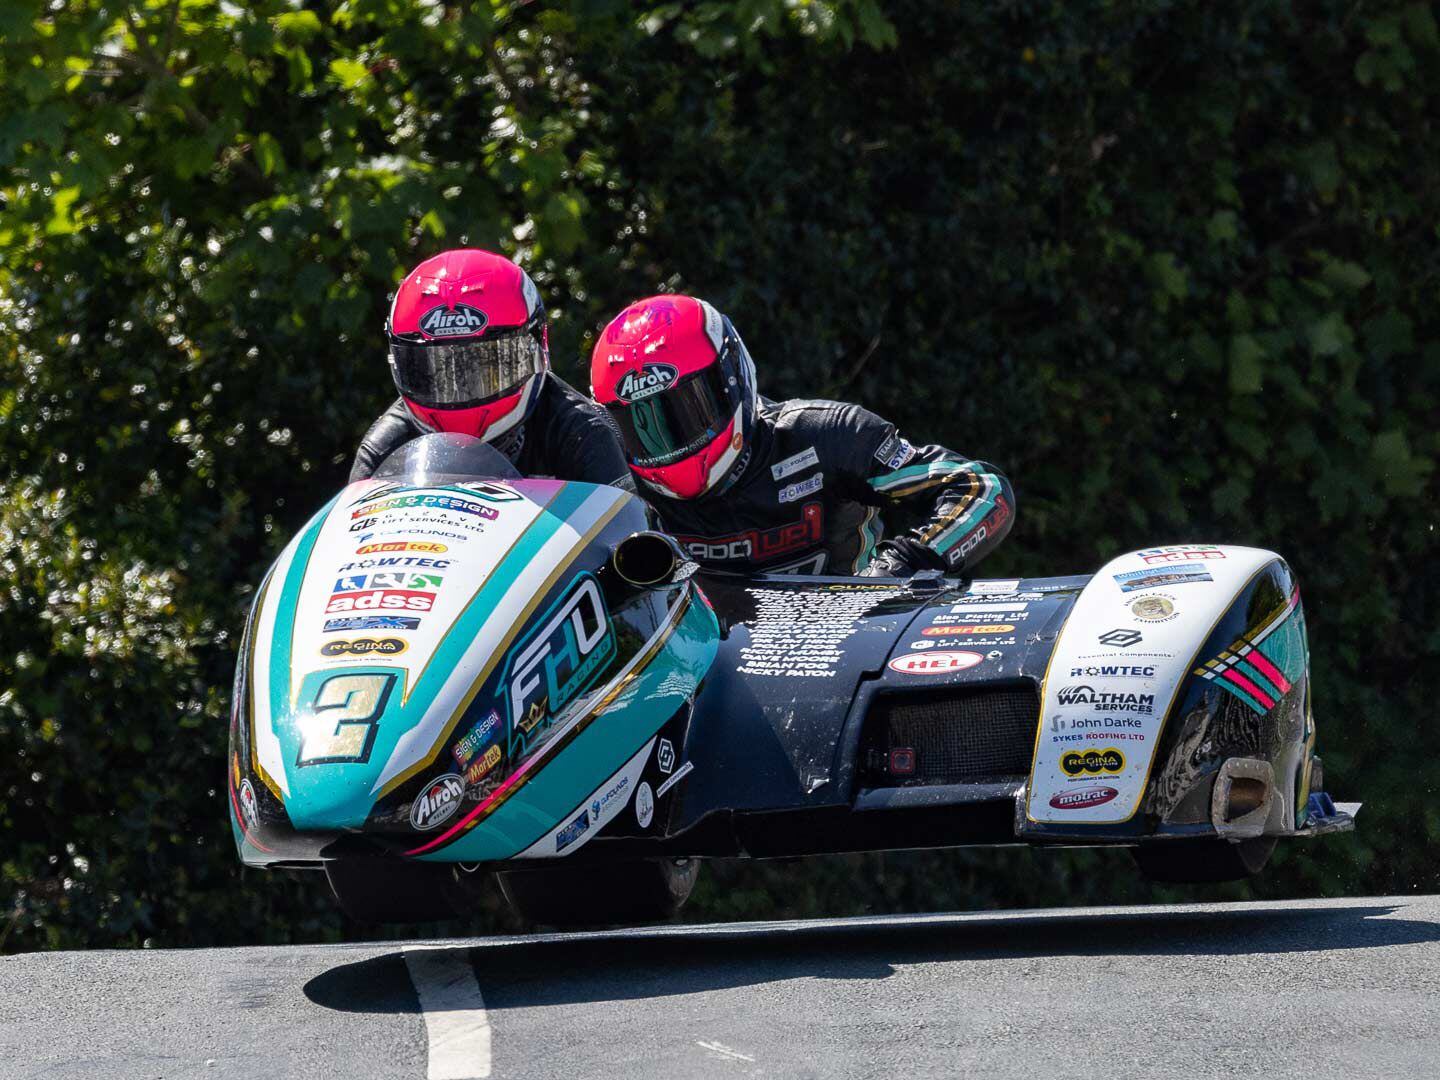 Taking flight at Ballaugh Bridge and close behind the Brichalls was the FHO Racing Team of Peter Founds and Jevan Walmsley, also on their Honda-powered sidecar.